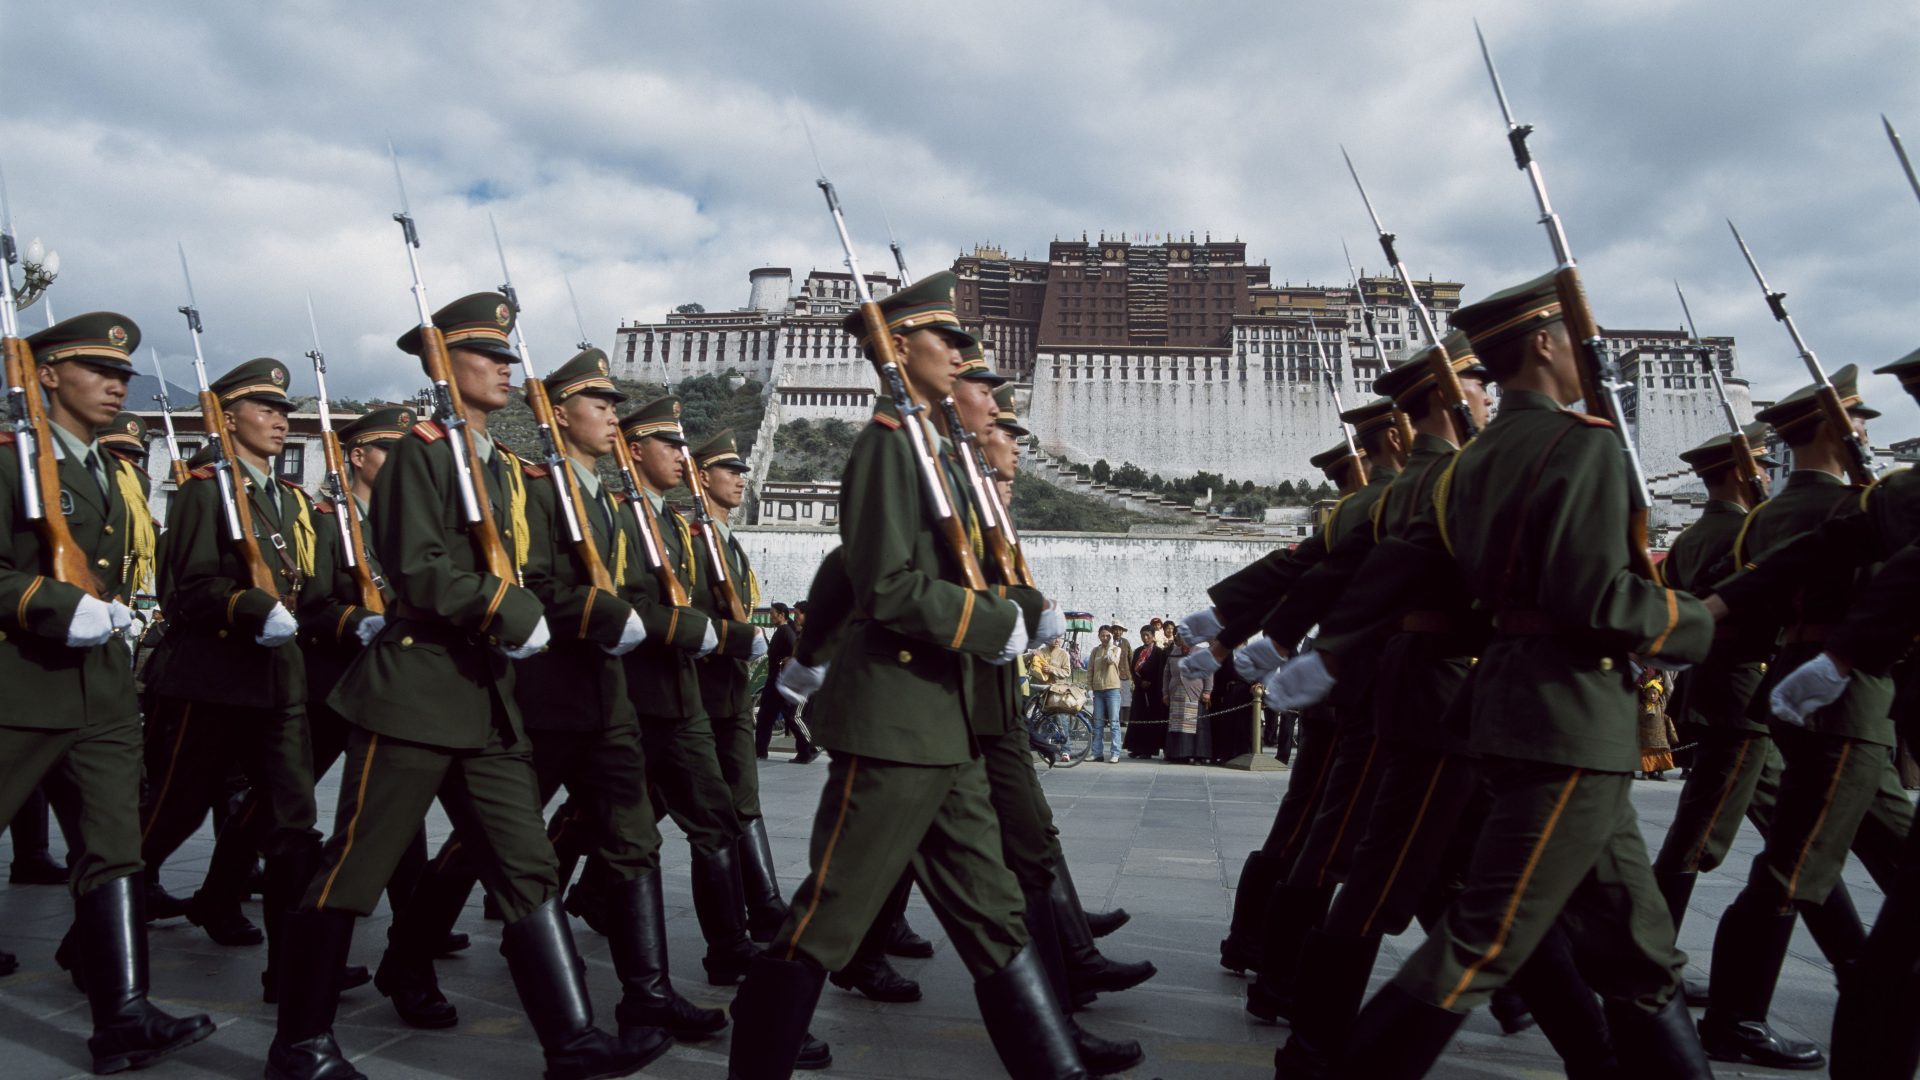 Chinese soldiers marching outside the Potala Palace